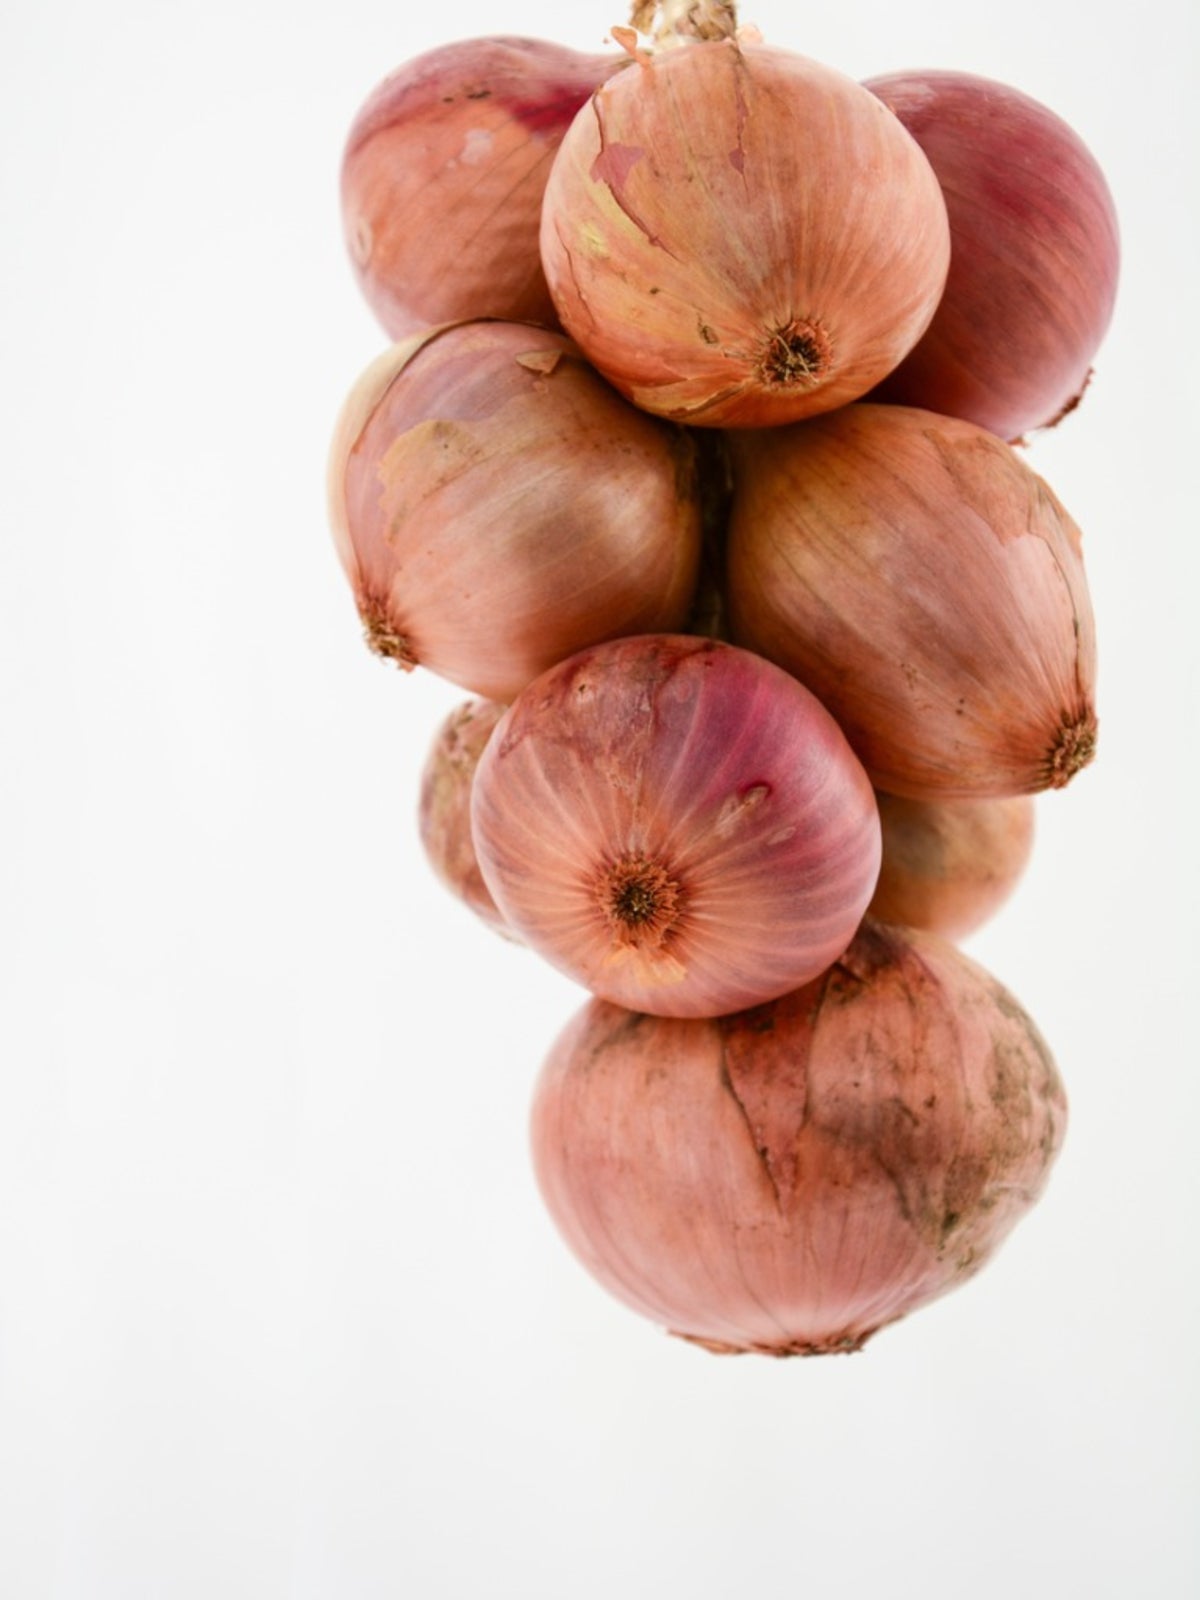 How to Store Onions So They Last Longer